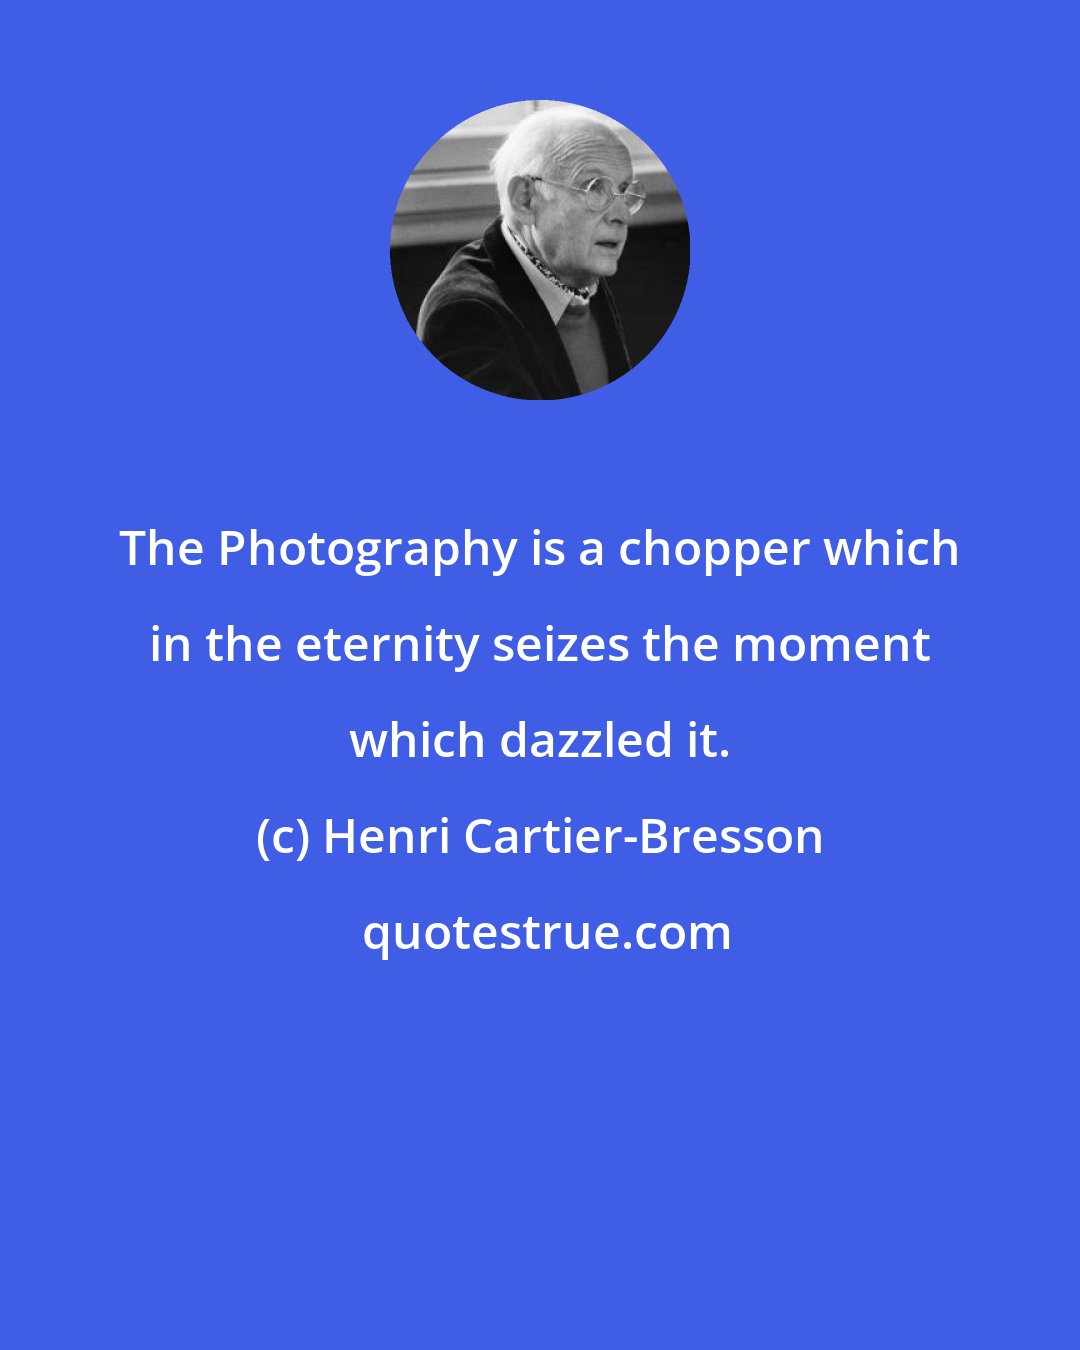 Henri Cartier-Bresson: The Photography is a chopper which in the eternity seizes the moment which dazzled it.